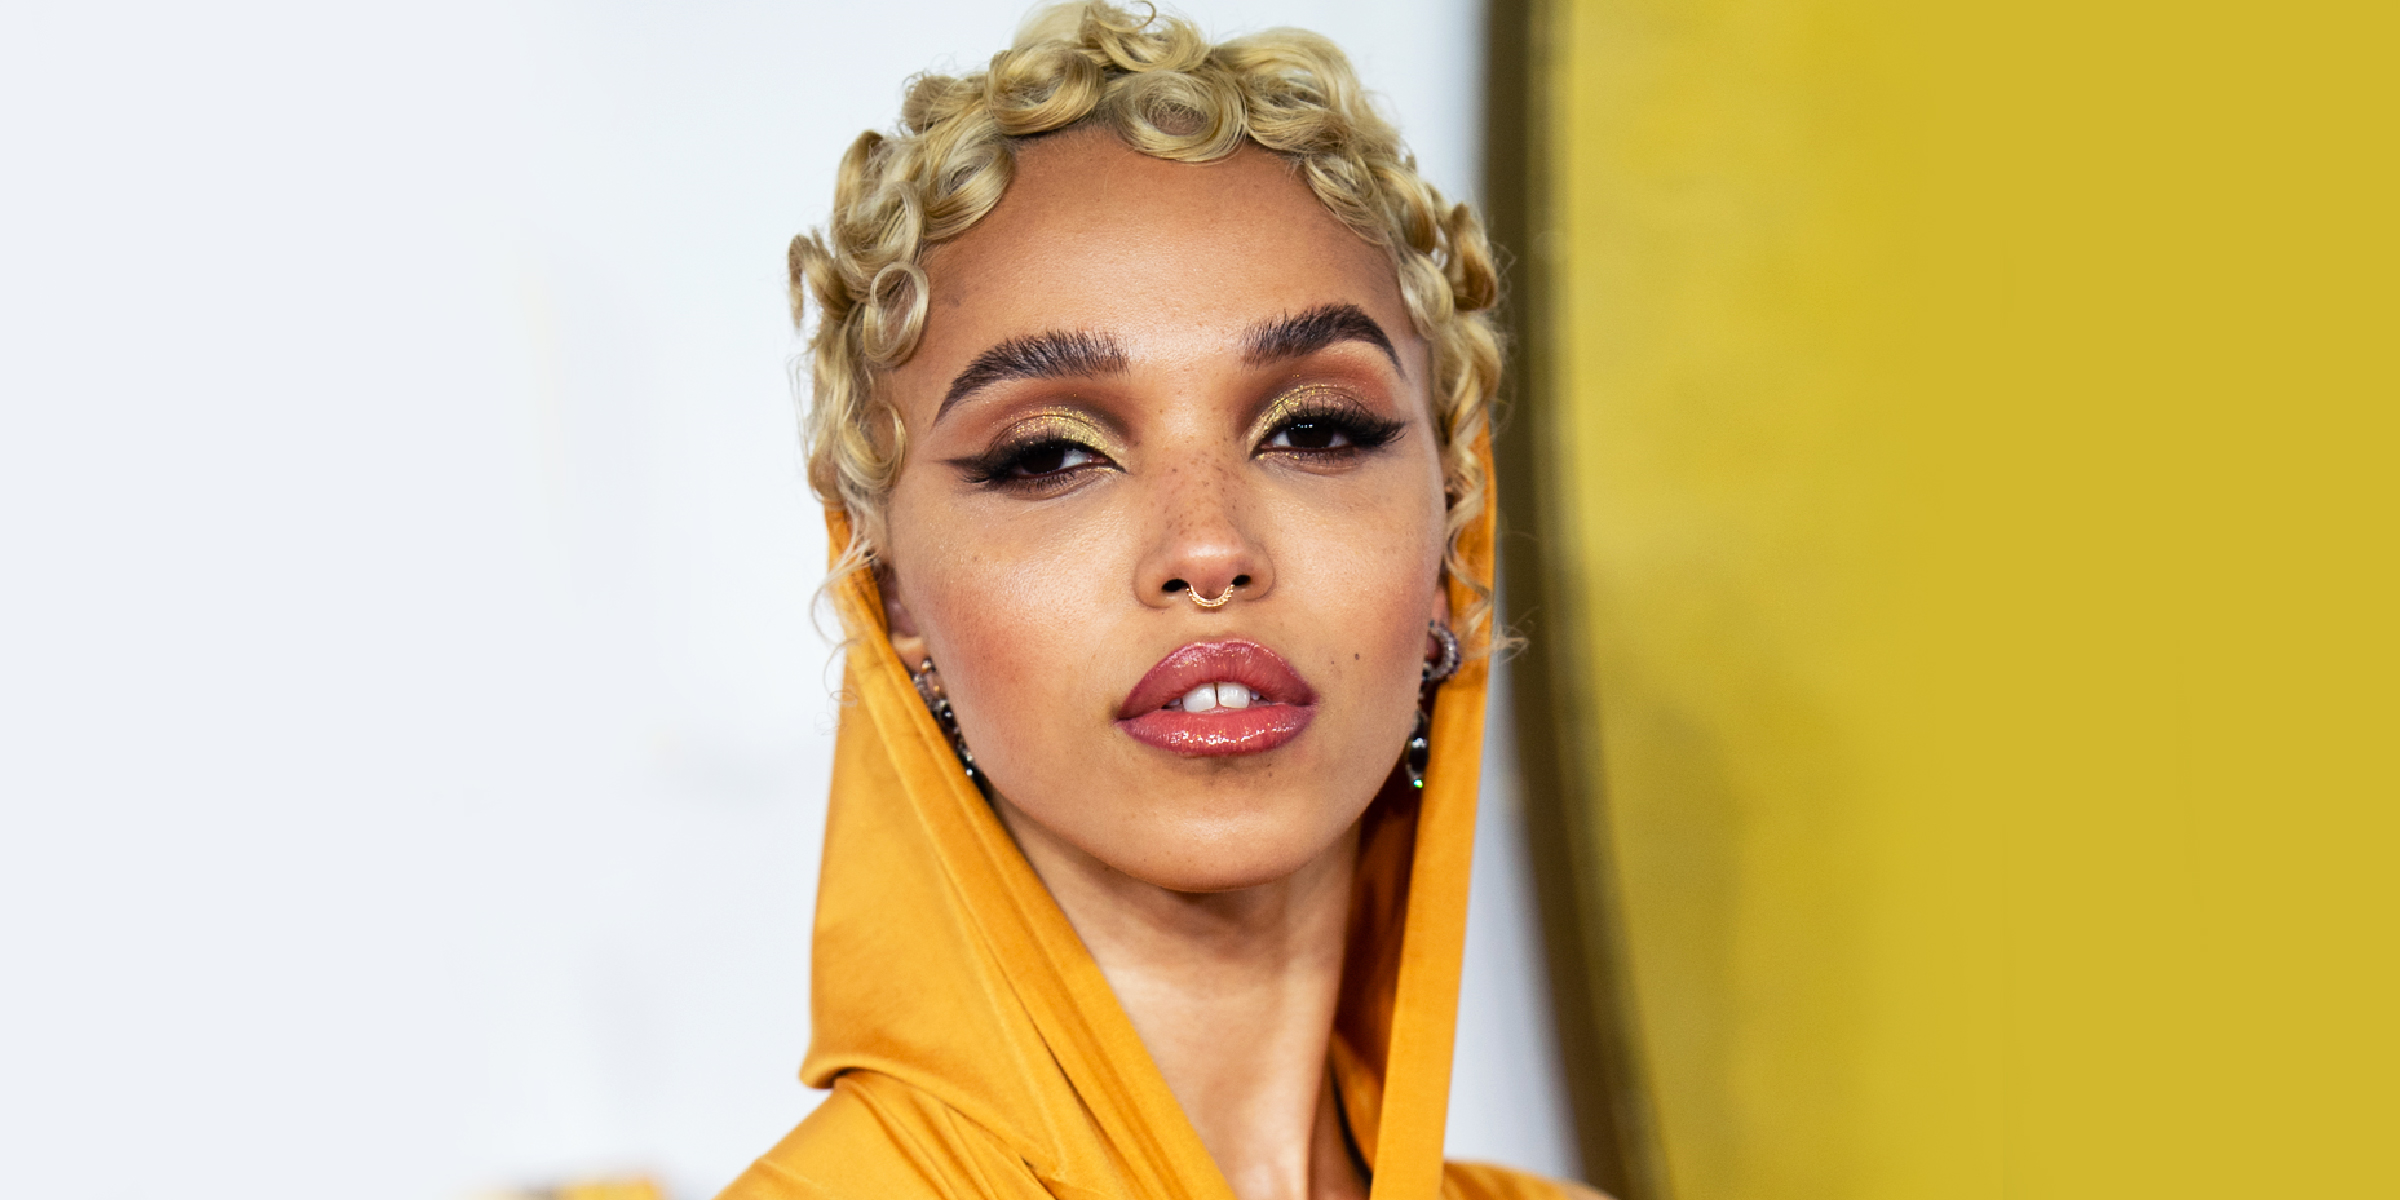 FKA Twigs | Source: Getty Images